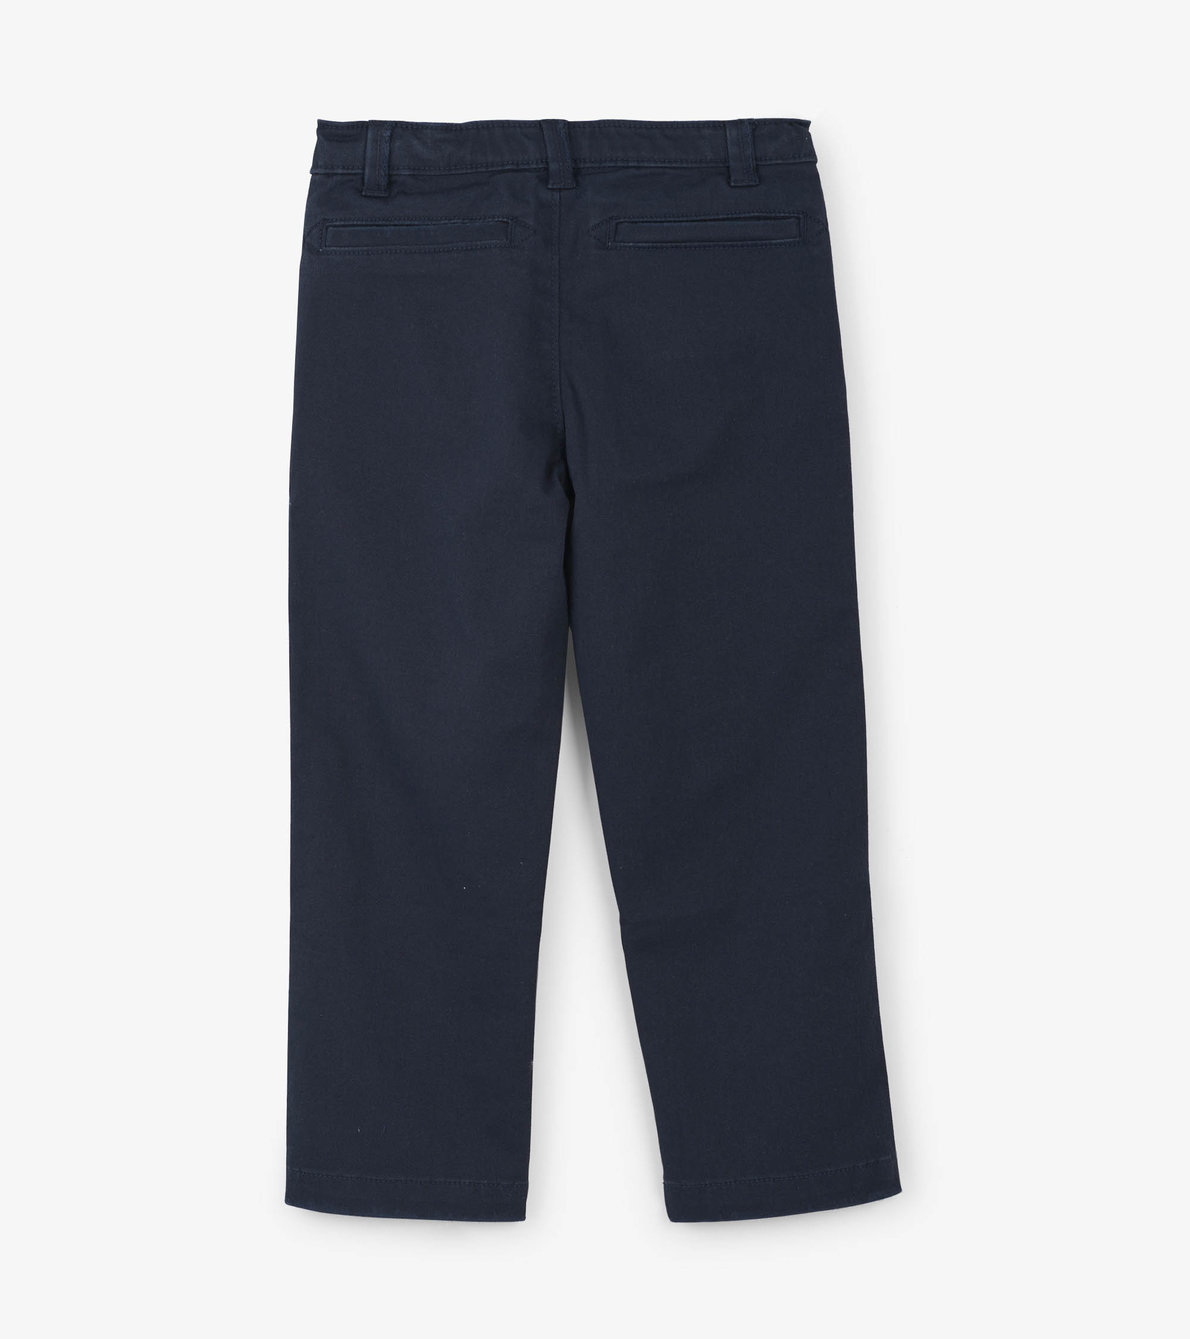 View larger image of Boys Navy Twill Pants